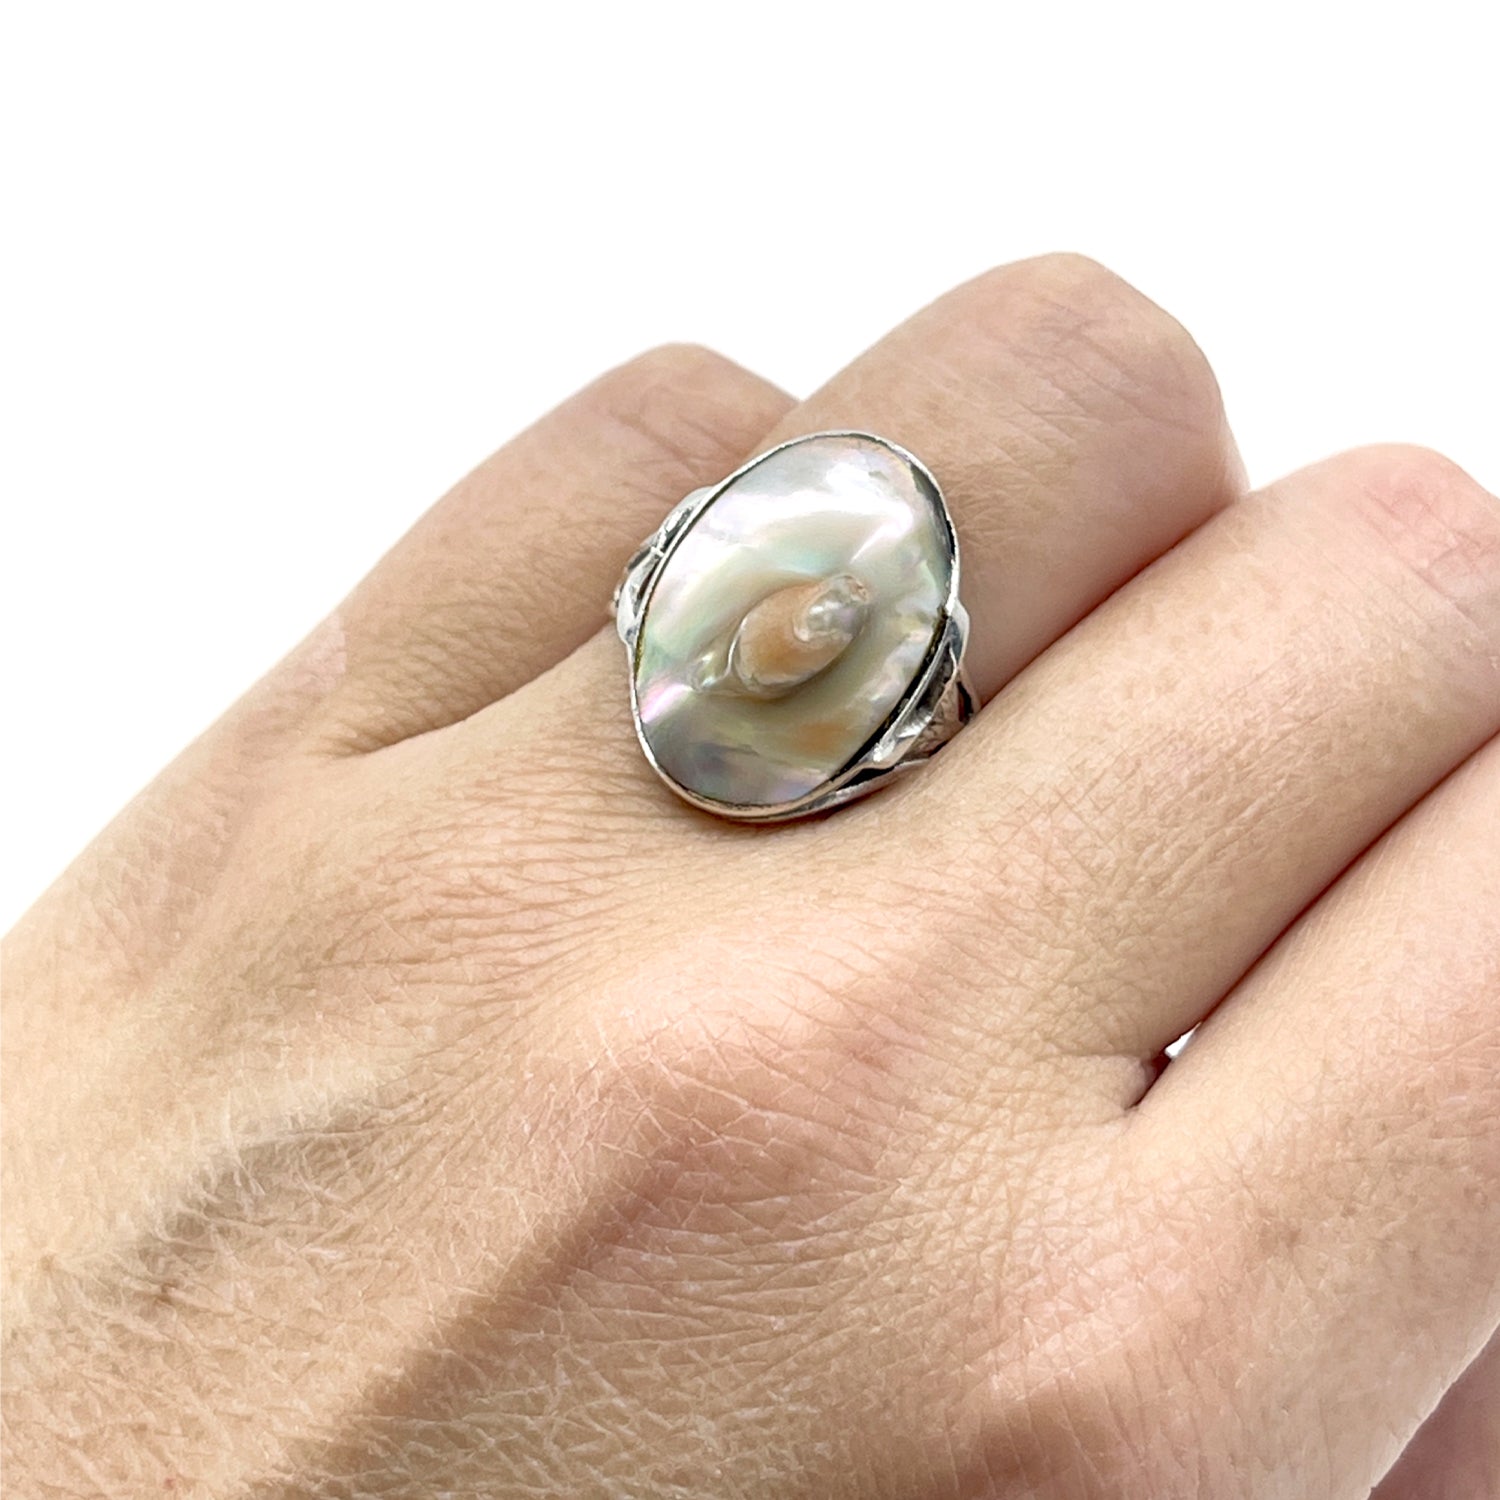 Art Nouveau Oval Abalone Blister Pearl Vintage Ring- Sterling Silver Sz 8.50